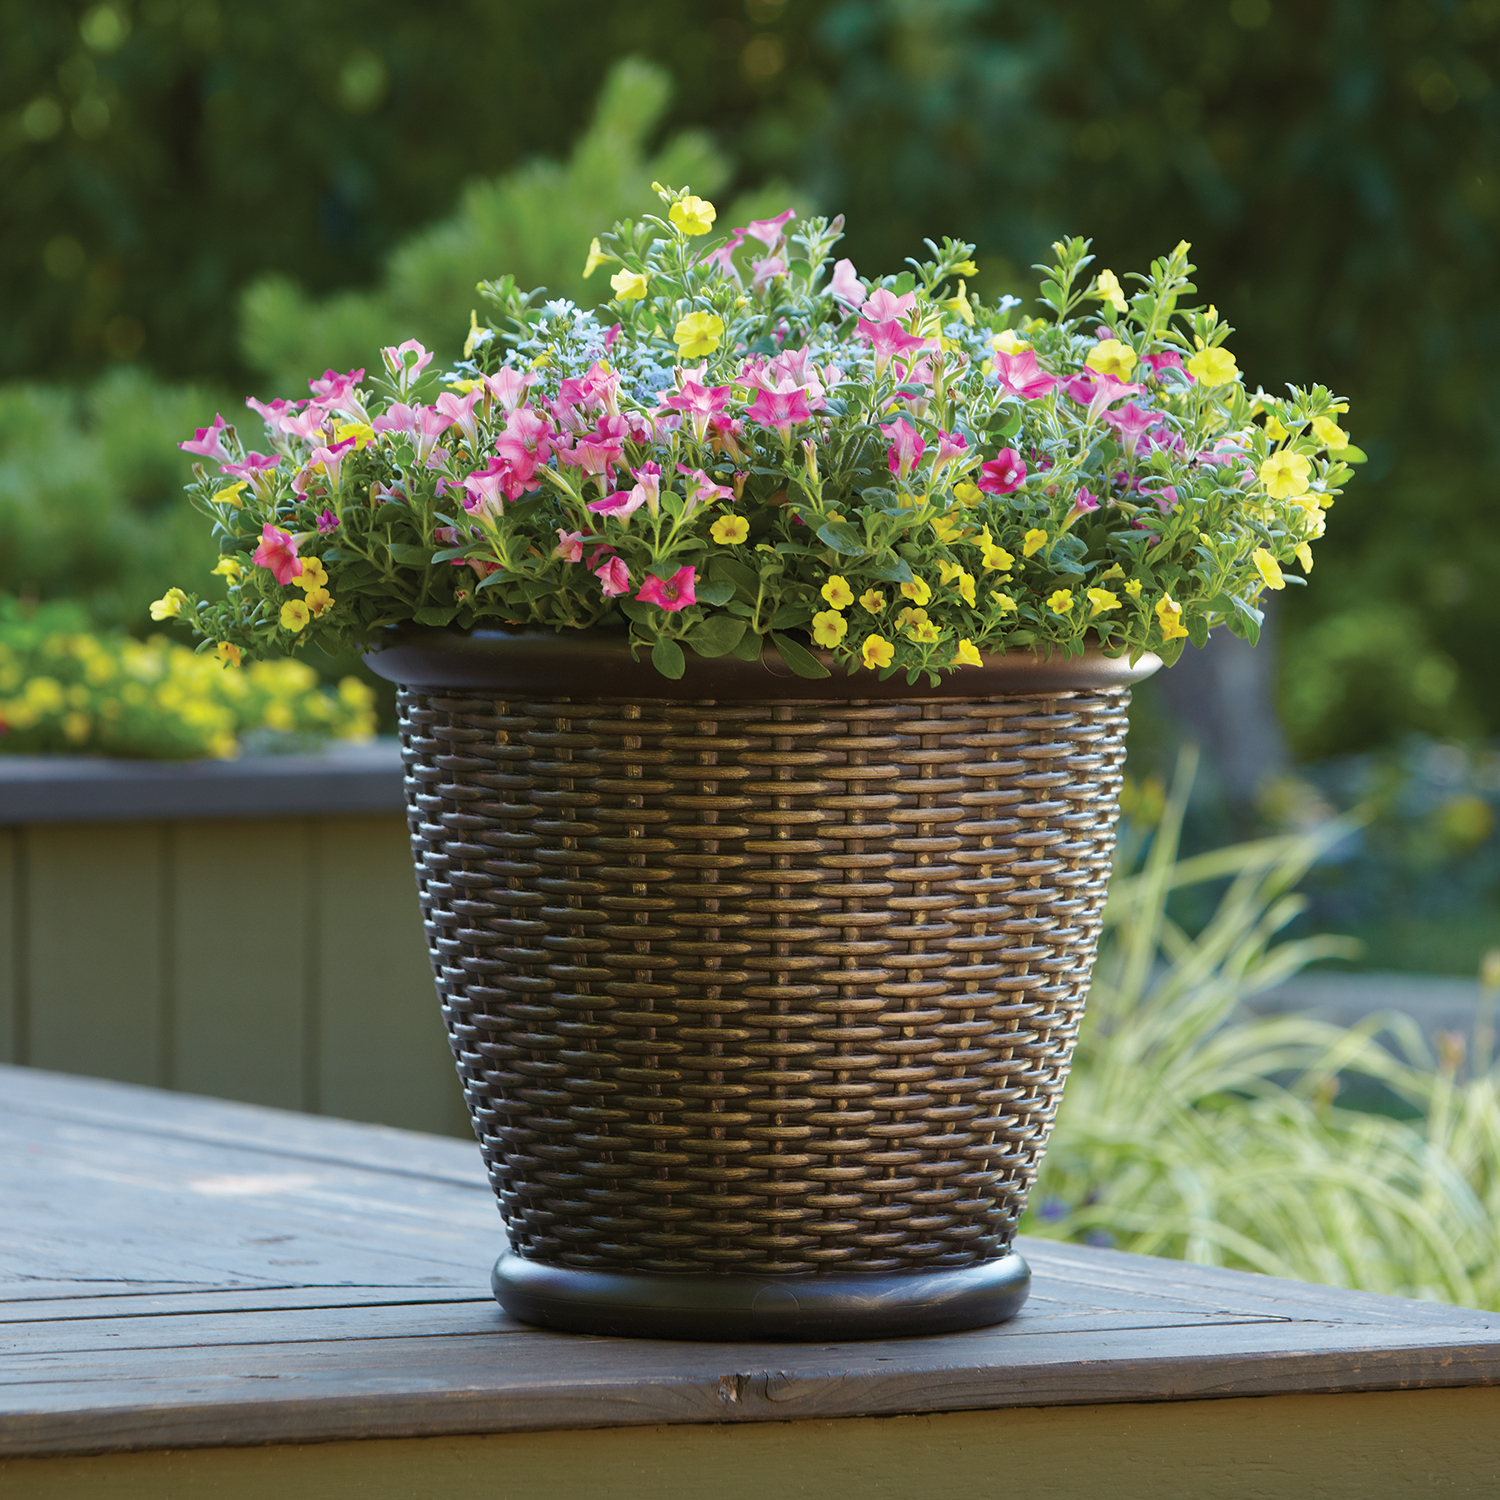 Better Homes & Gardens 18 in. Faux Wicker Resin Planter Pot, Java Brown - image 1 of 2